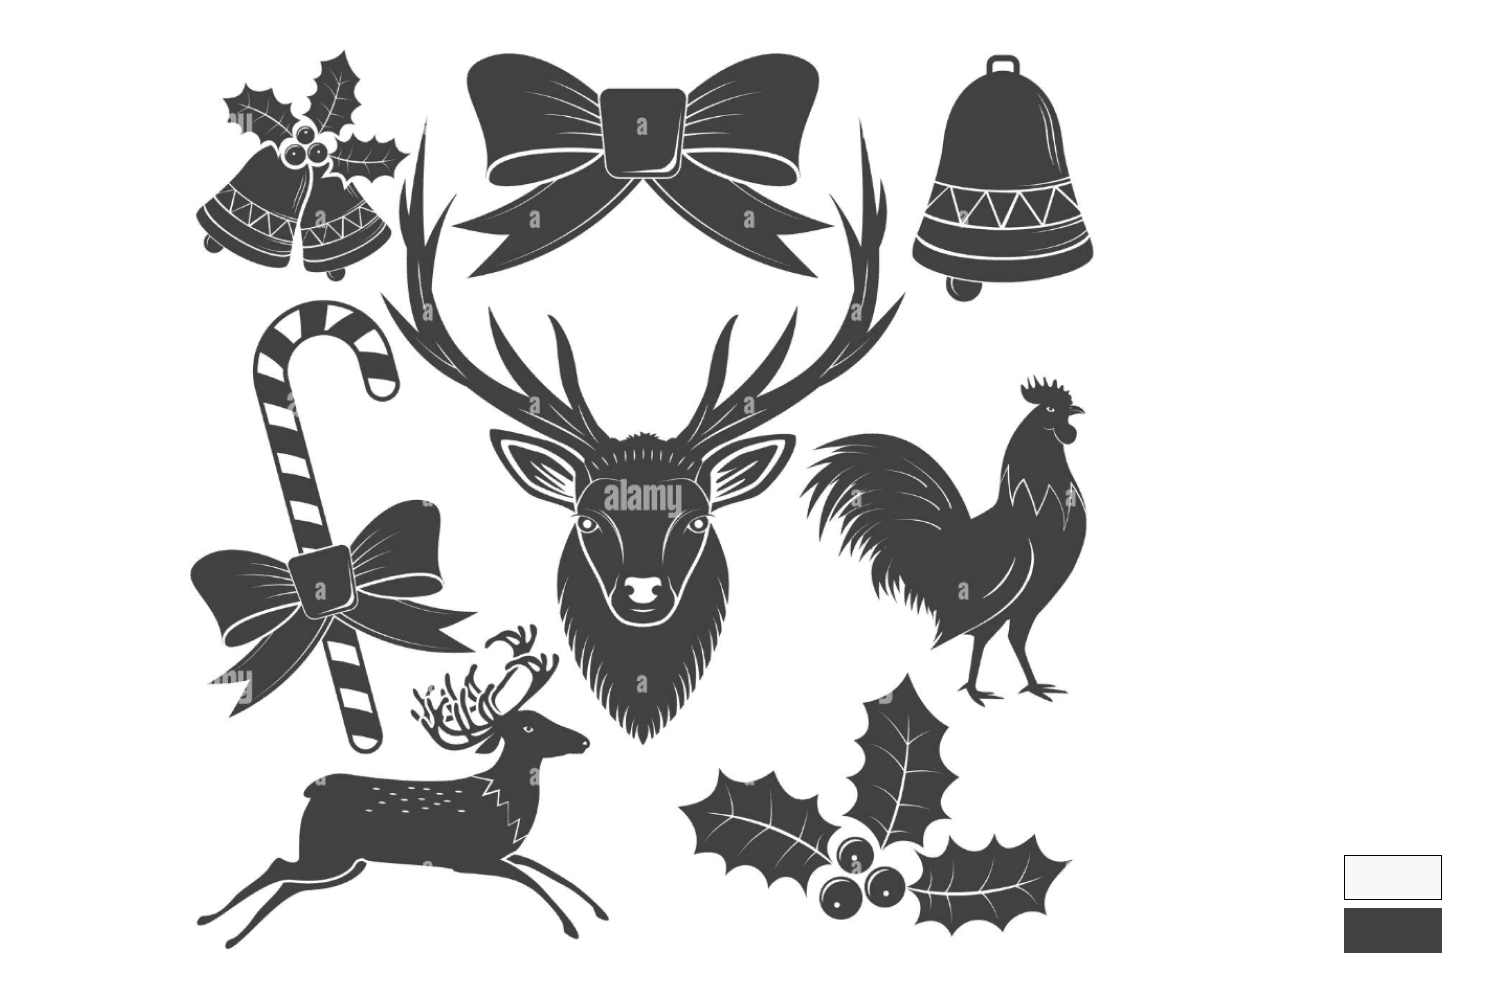 Collage with hand-drawn images of a rooster, deer, holly, bell bow, and bells silhouettes.